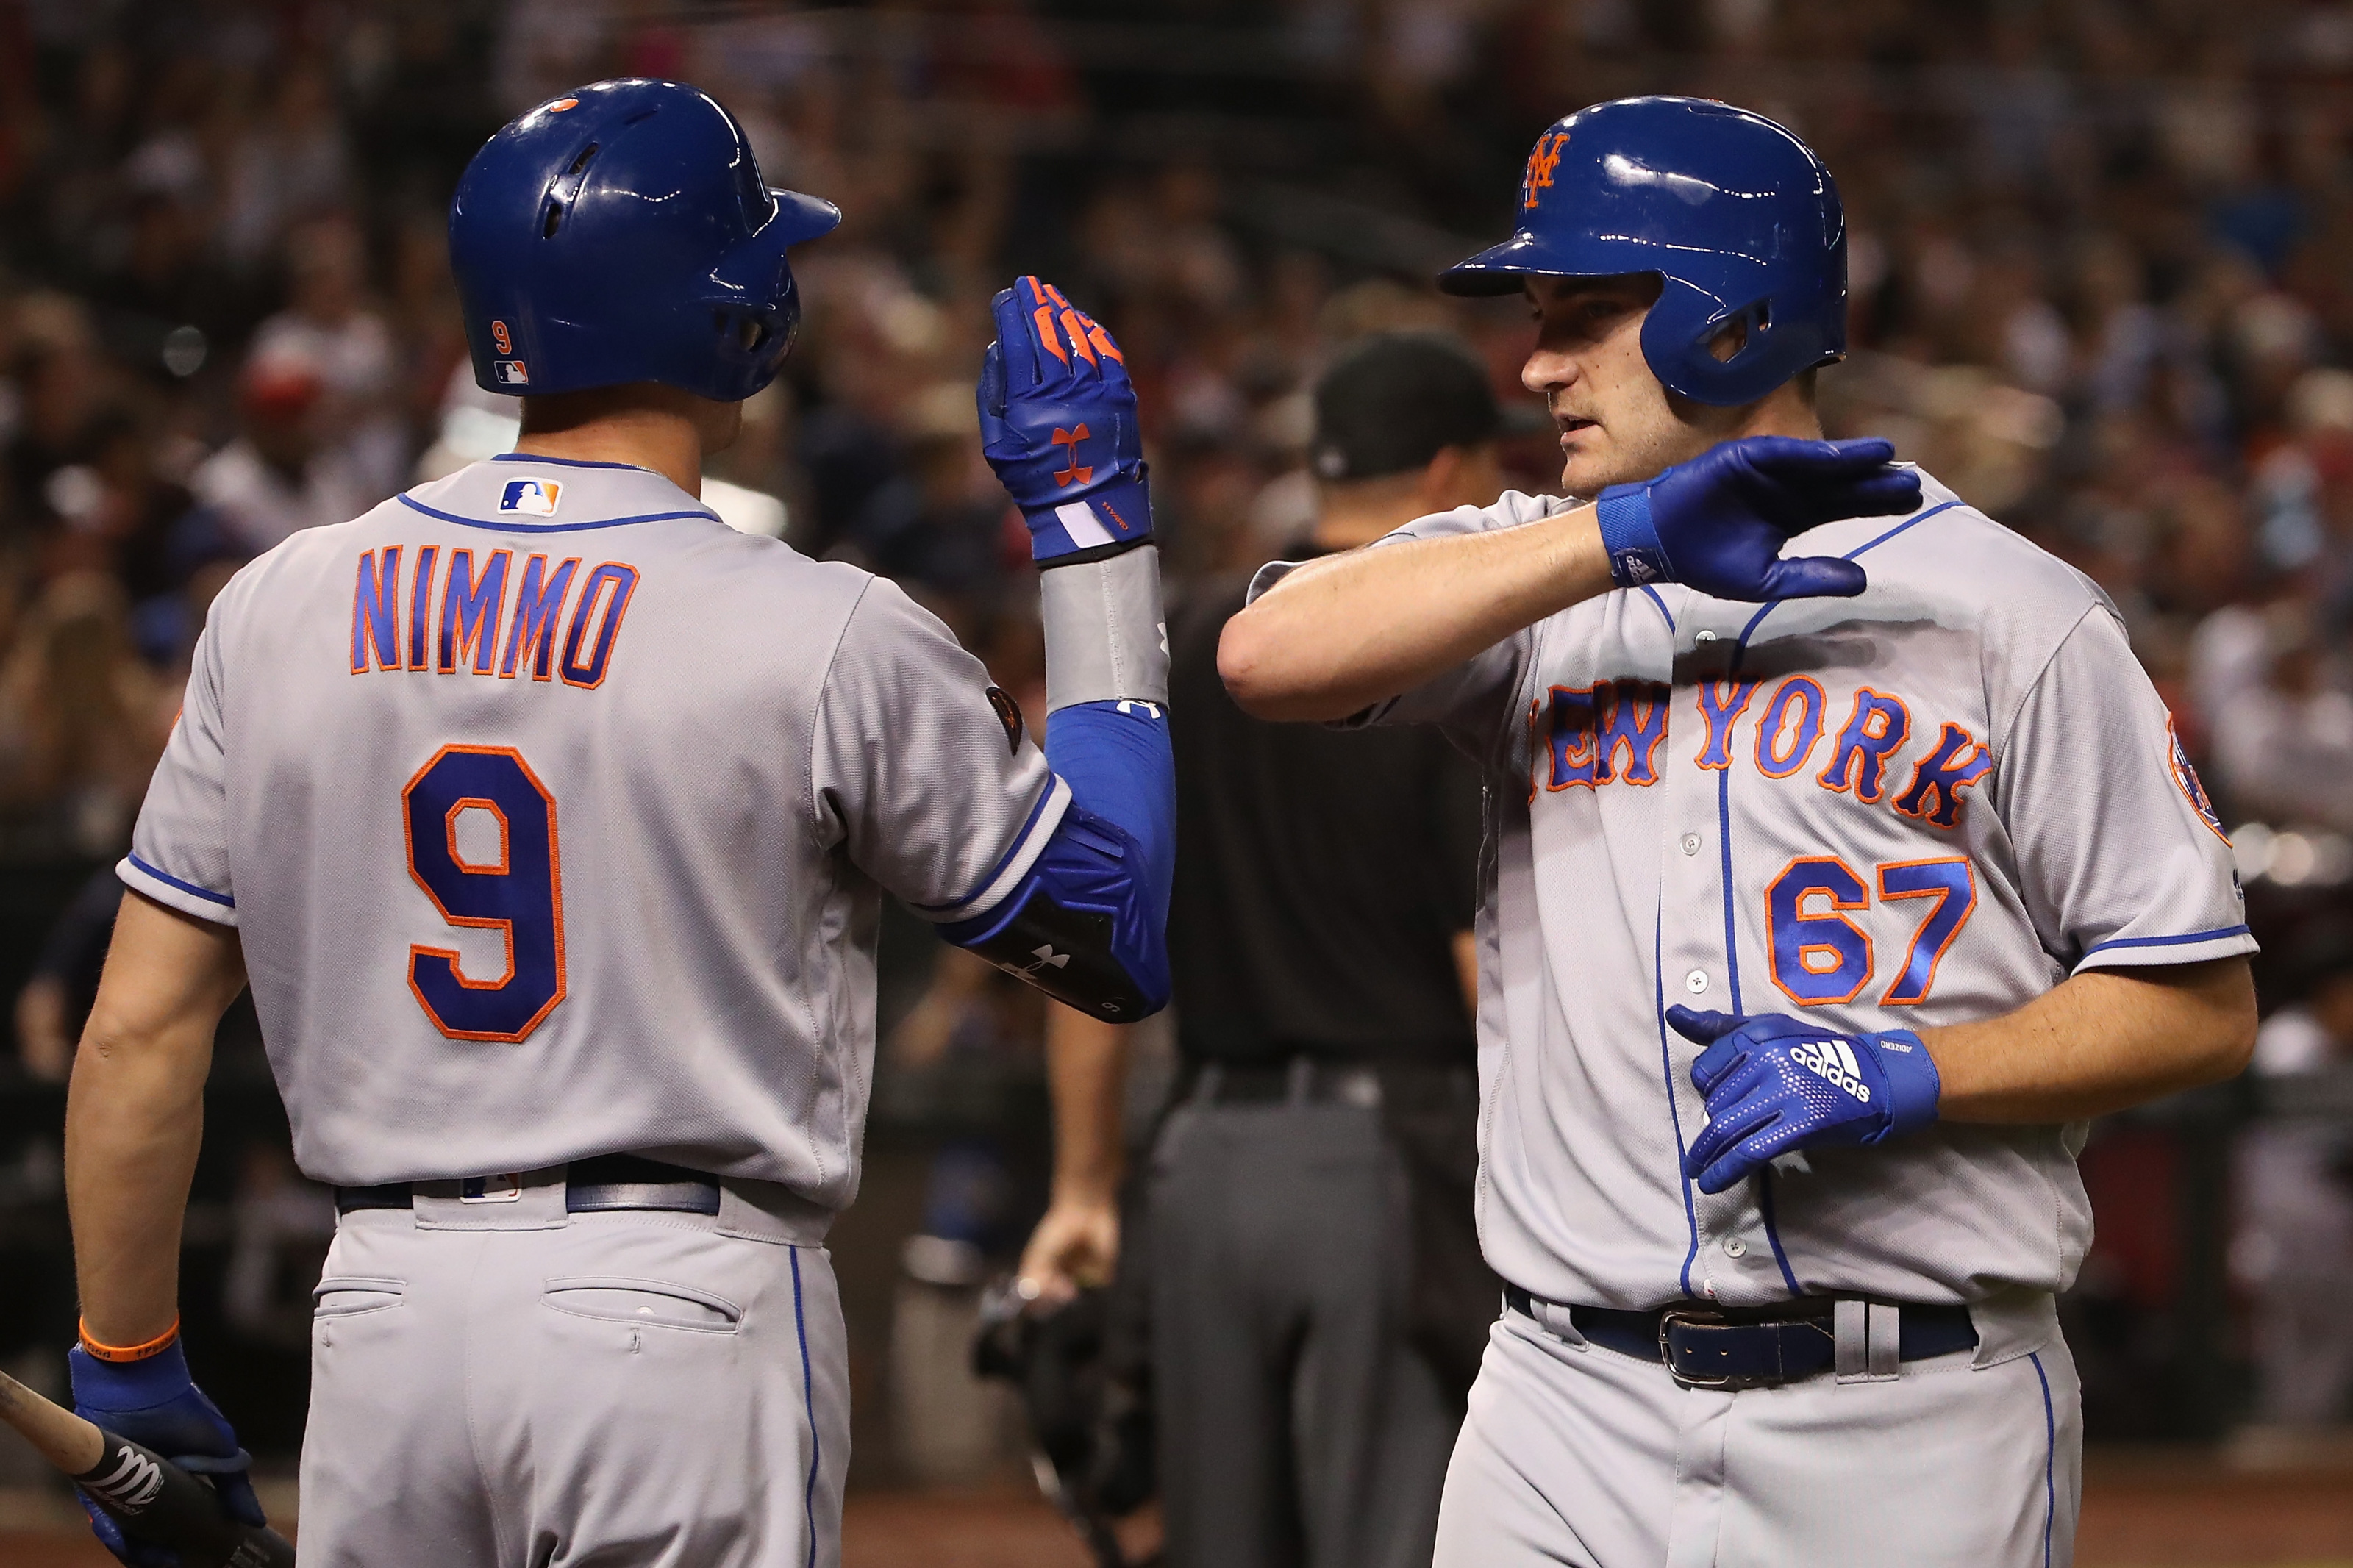 New York Mets: Brandon Nimmo quickly becoming a star